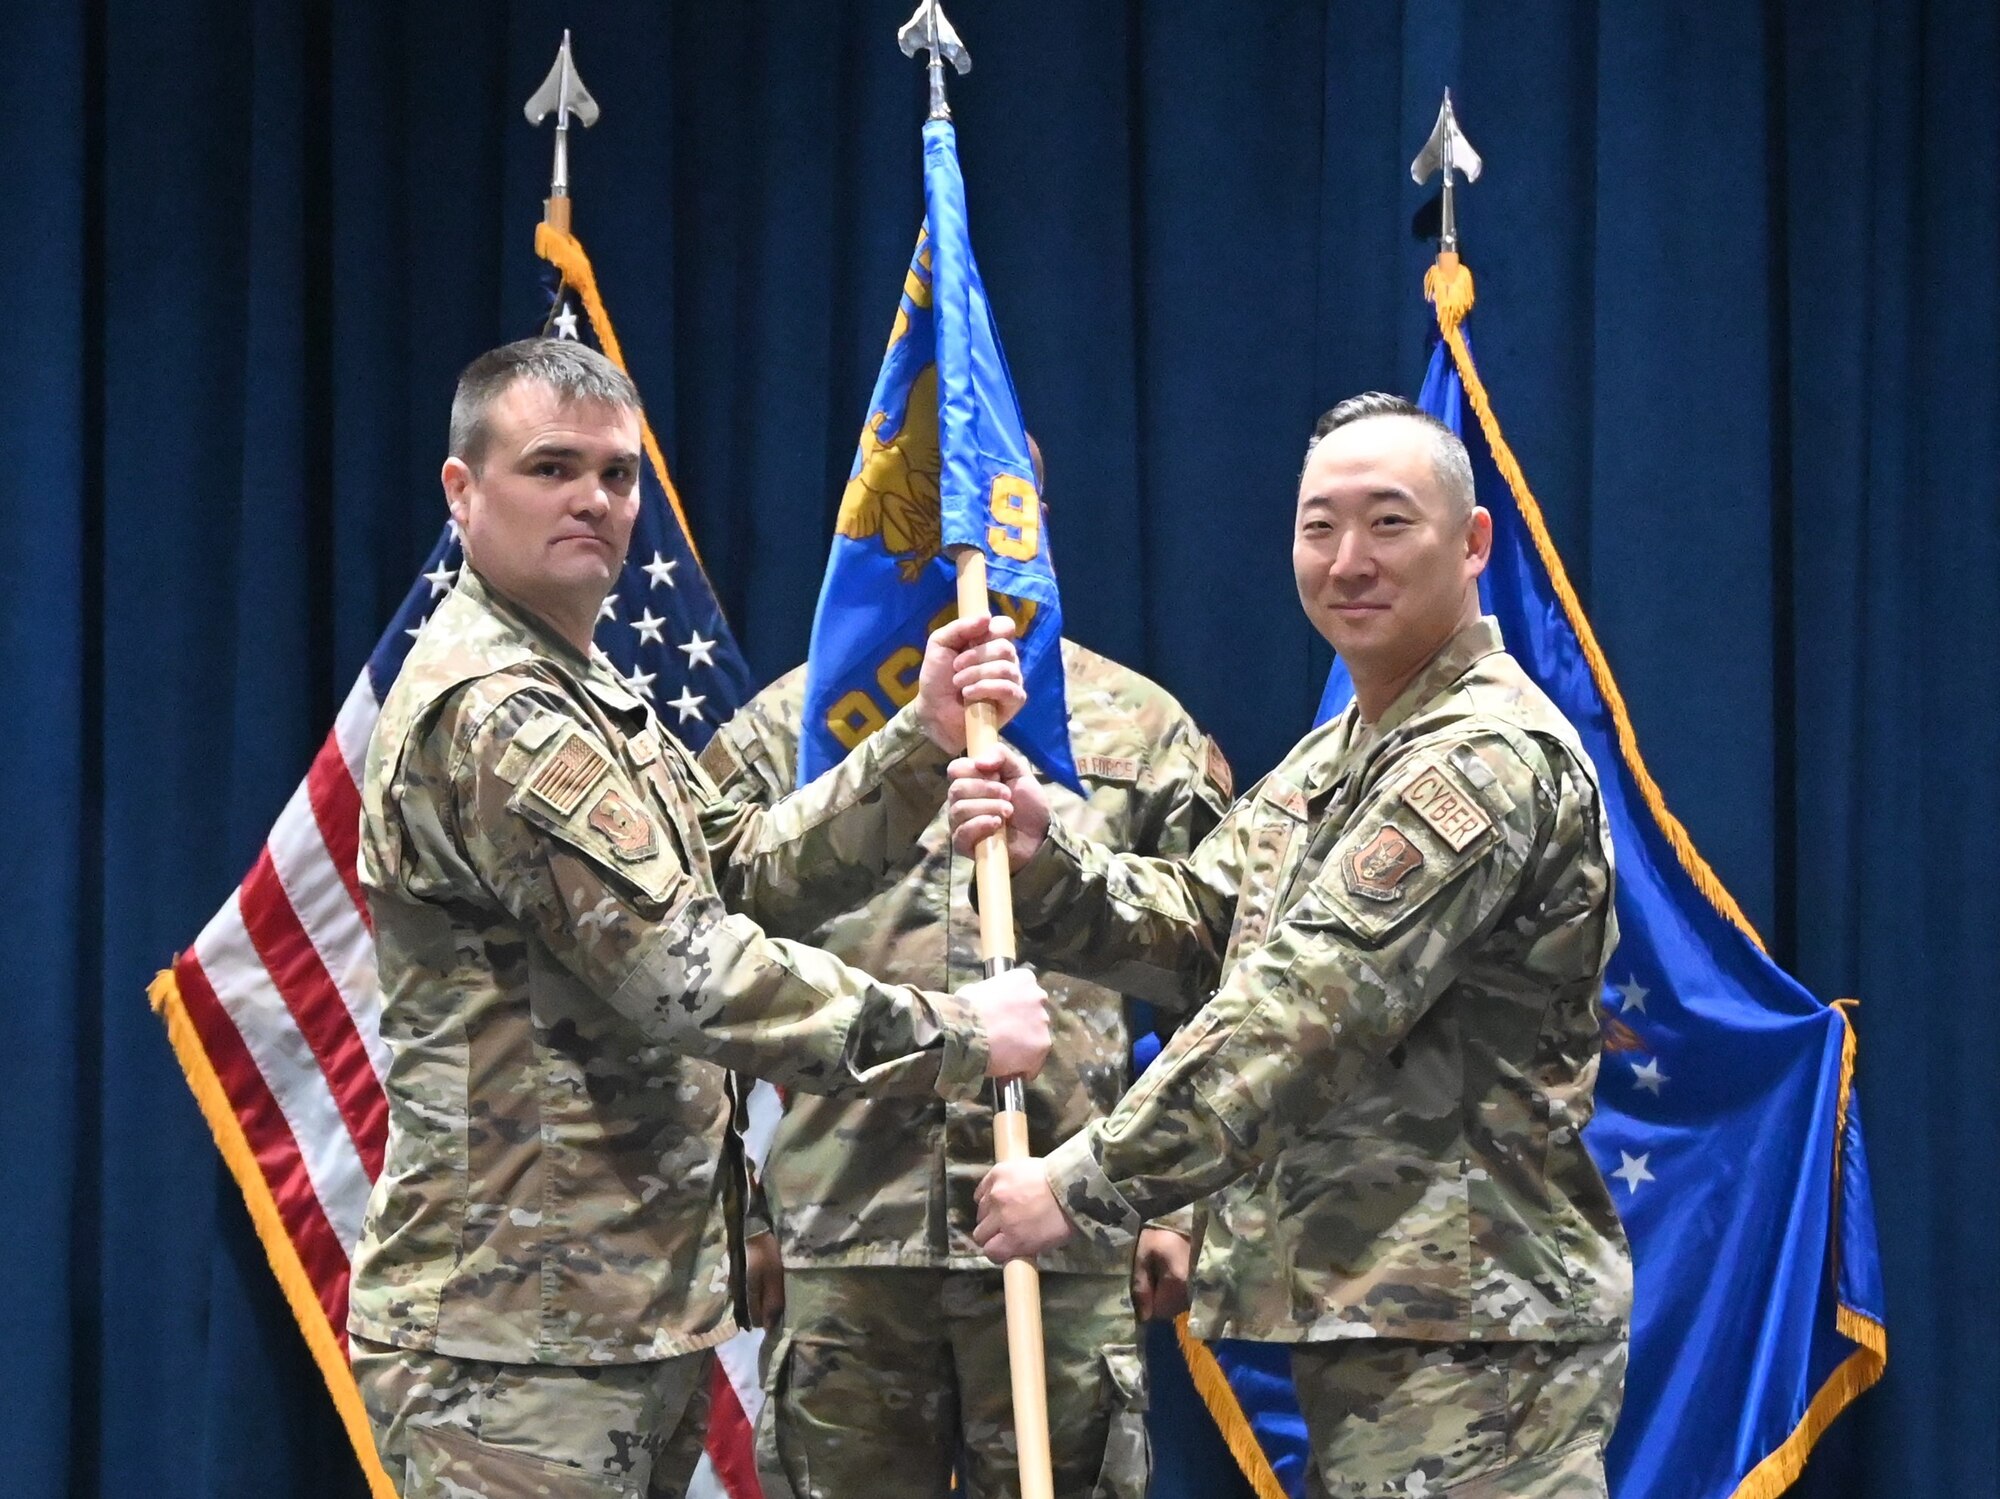  Lt. Col. Jarvis Croff relinquished command of the 960th Operations Support Flight, 960th Cyberspace Wing, to Lt. Col. Andrew Heo Feb. 5, 2023, during a change of command ceremony at Joint Base San Antonio-Lackland, Texas.